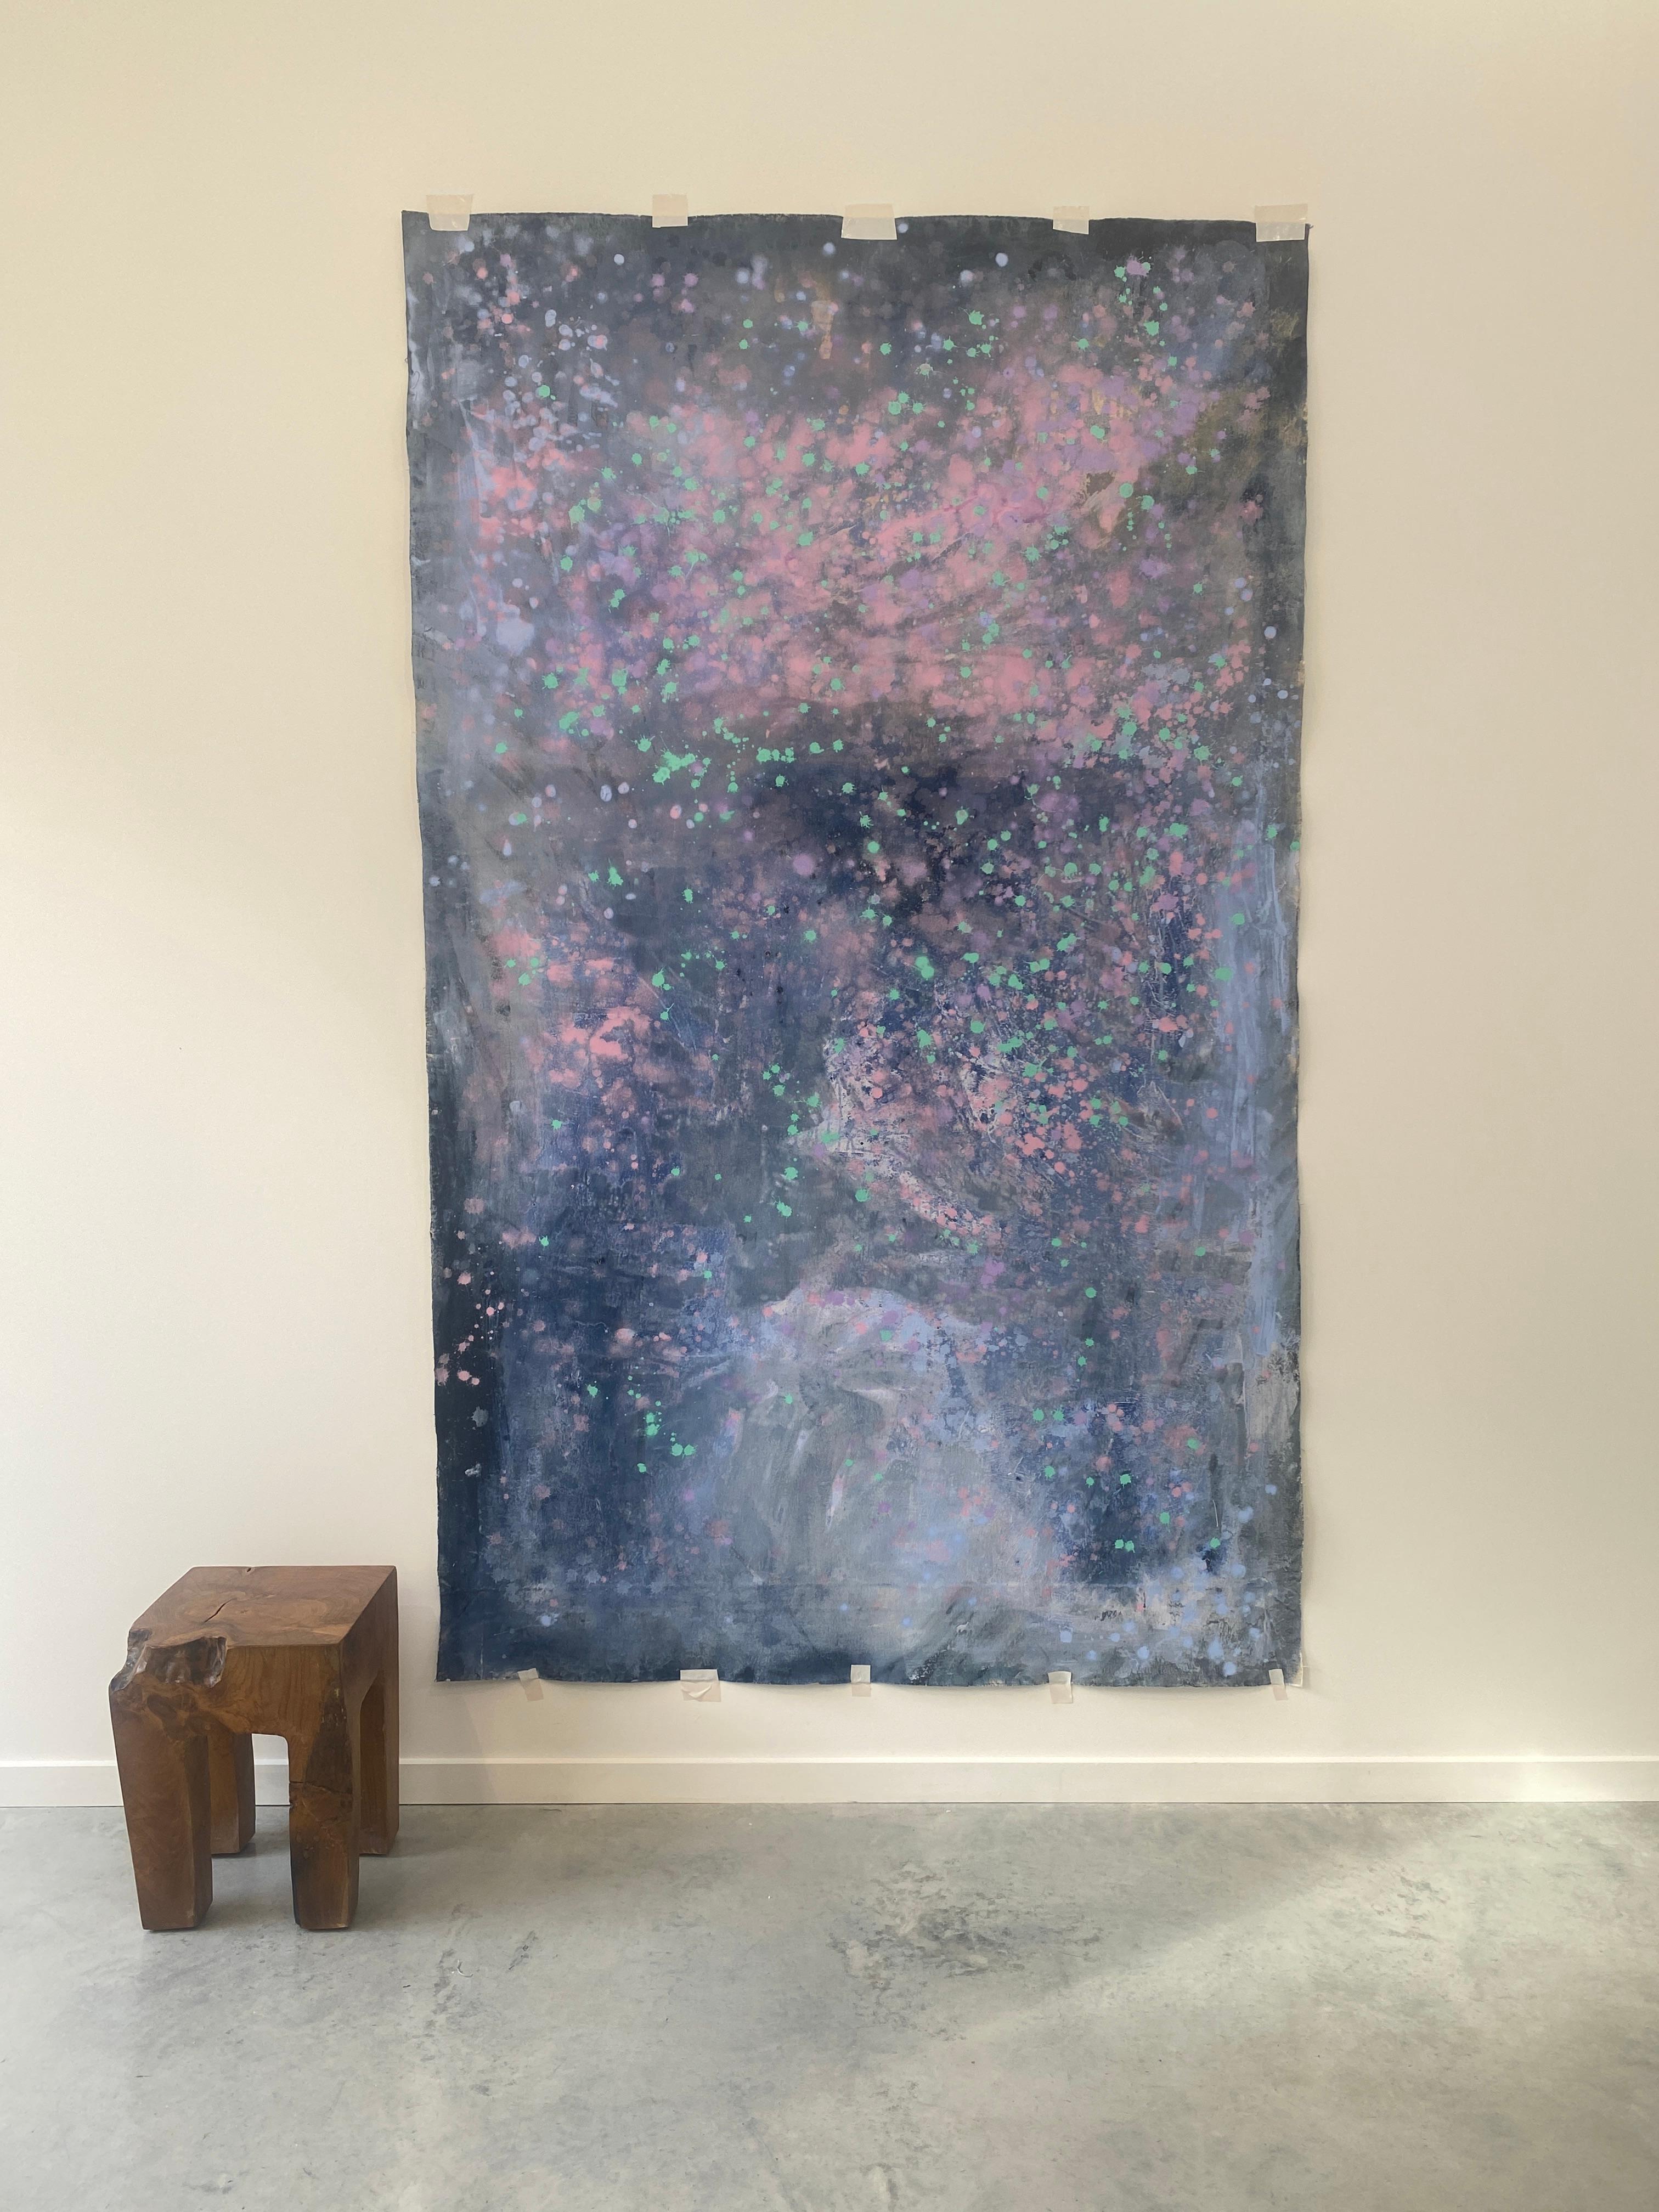 Abstract impressions of a dark night sky sparkling by the light of the famous Milky Way. In true abstract expressionist style 'What Dreams Are Made Of ' is an unforgettable, striking large scale abstract collection celebrating colour, light and